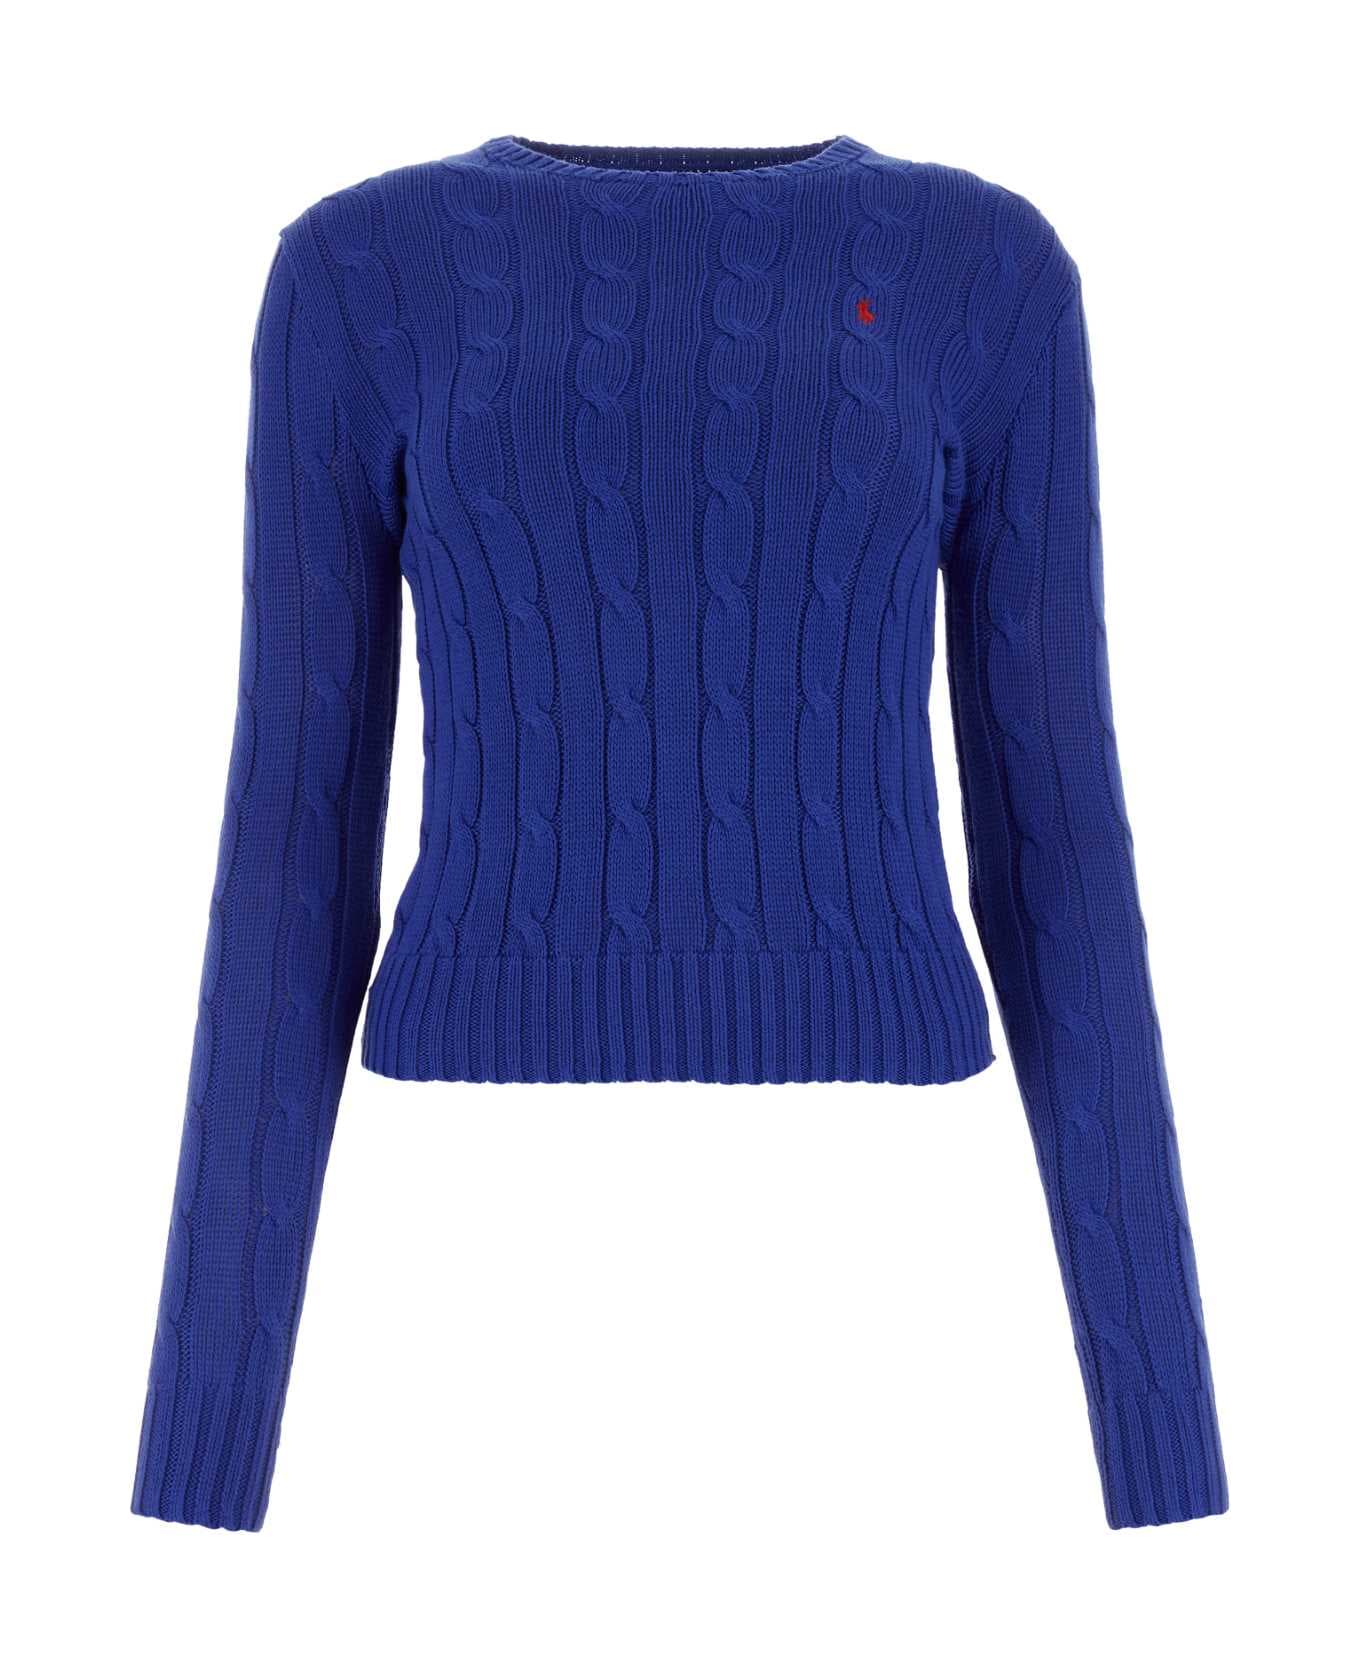 Polo Ralph Lauren Electric Blue Cotton Sweater - RUGBYROYAL